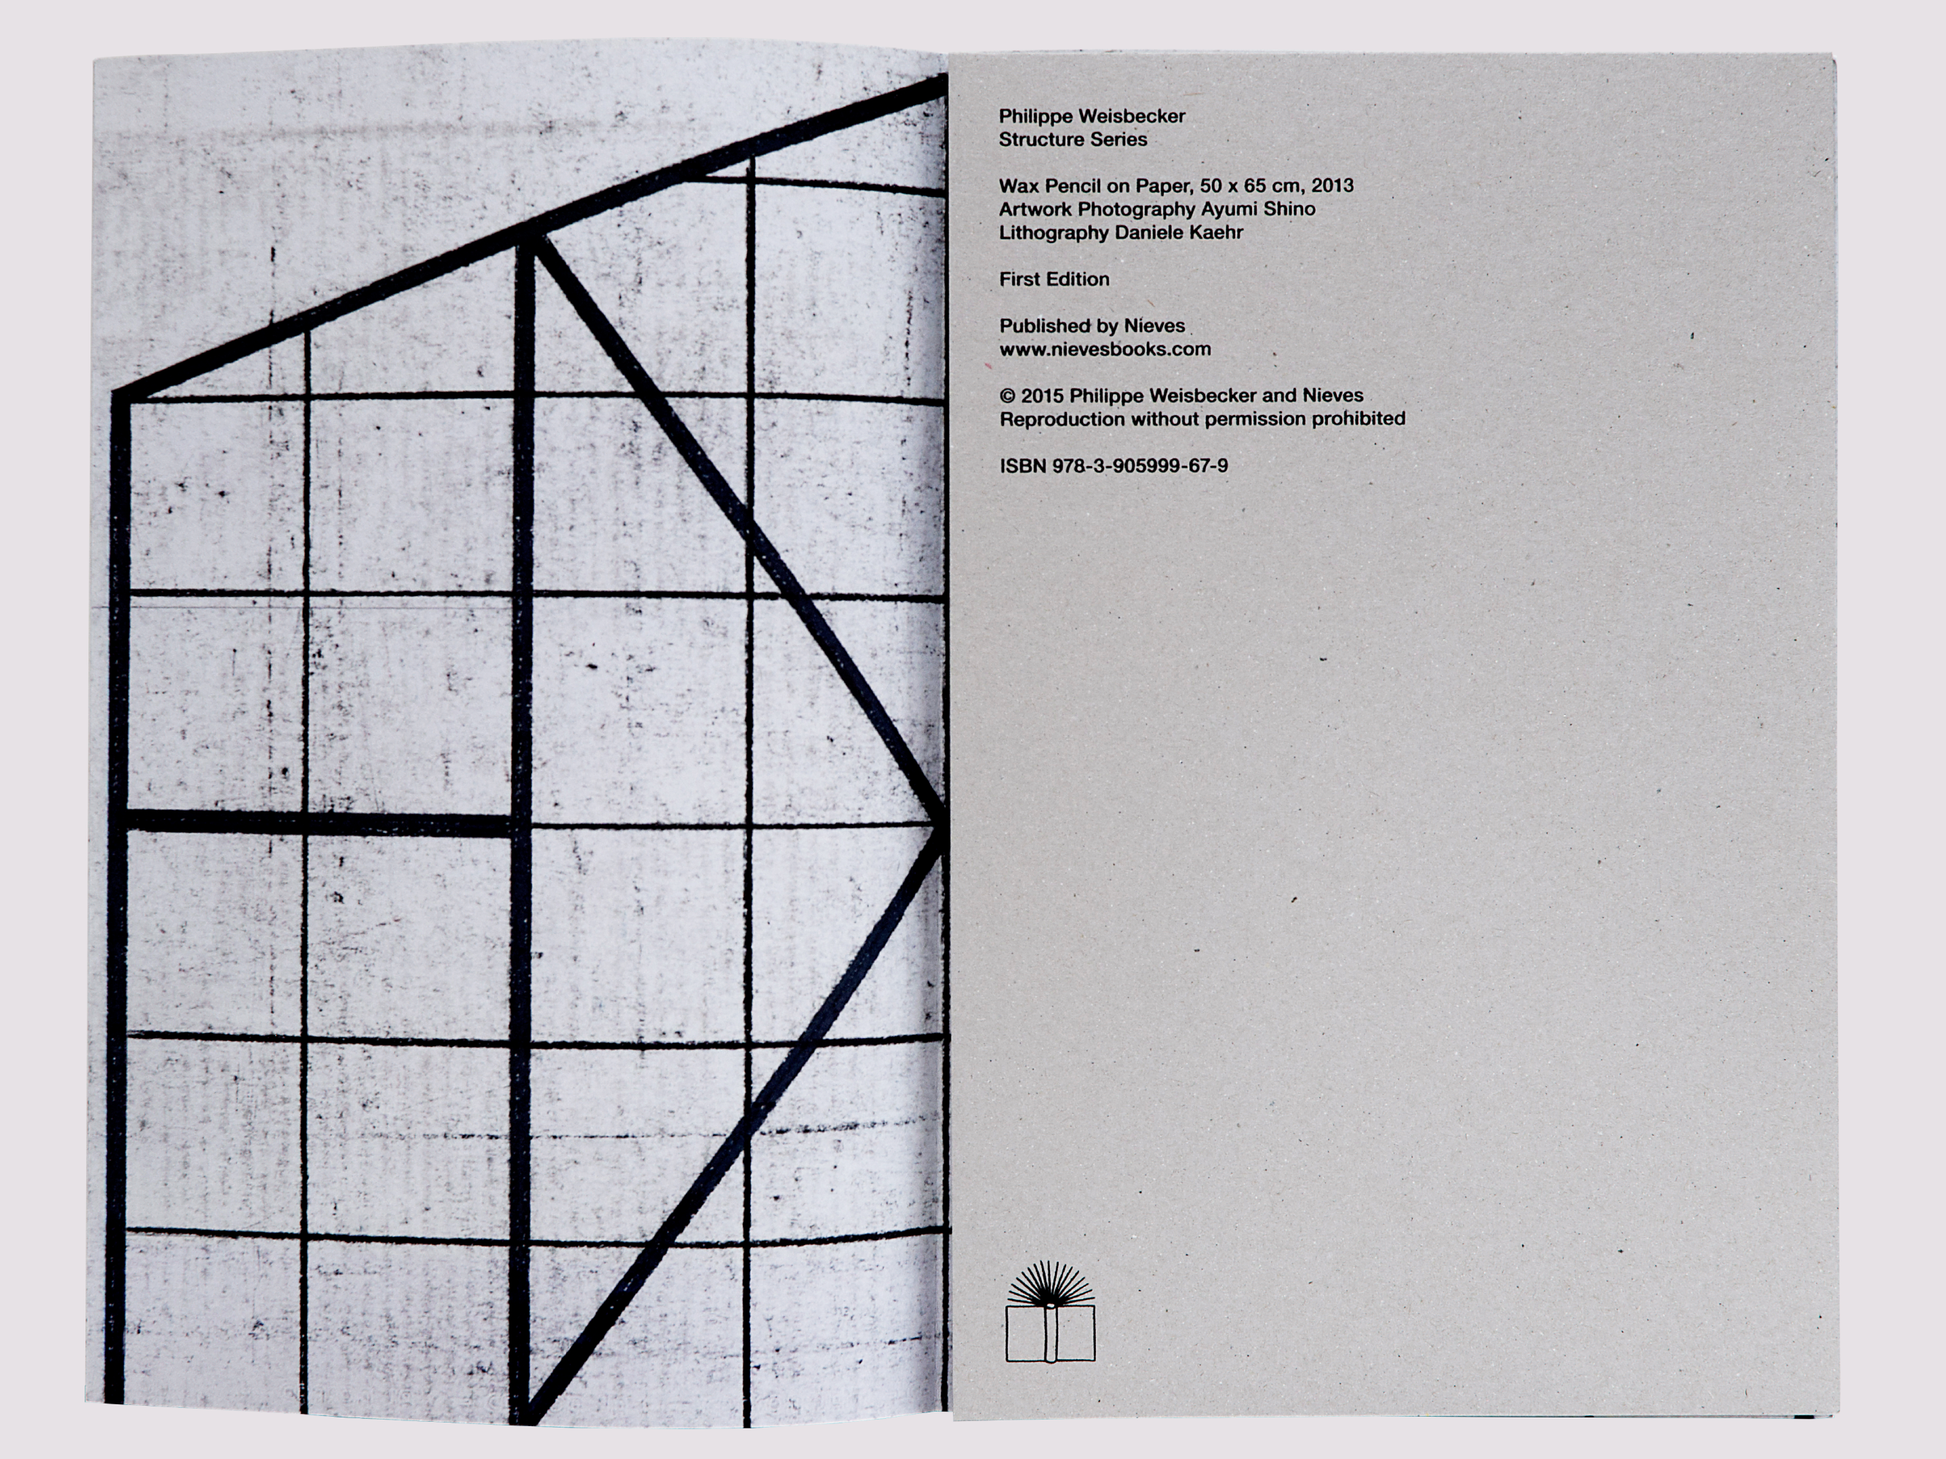 Structure Series/Philippe Weisbecker published by Nieves